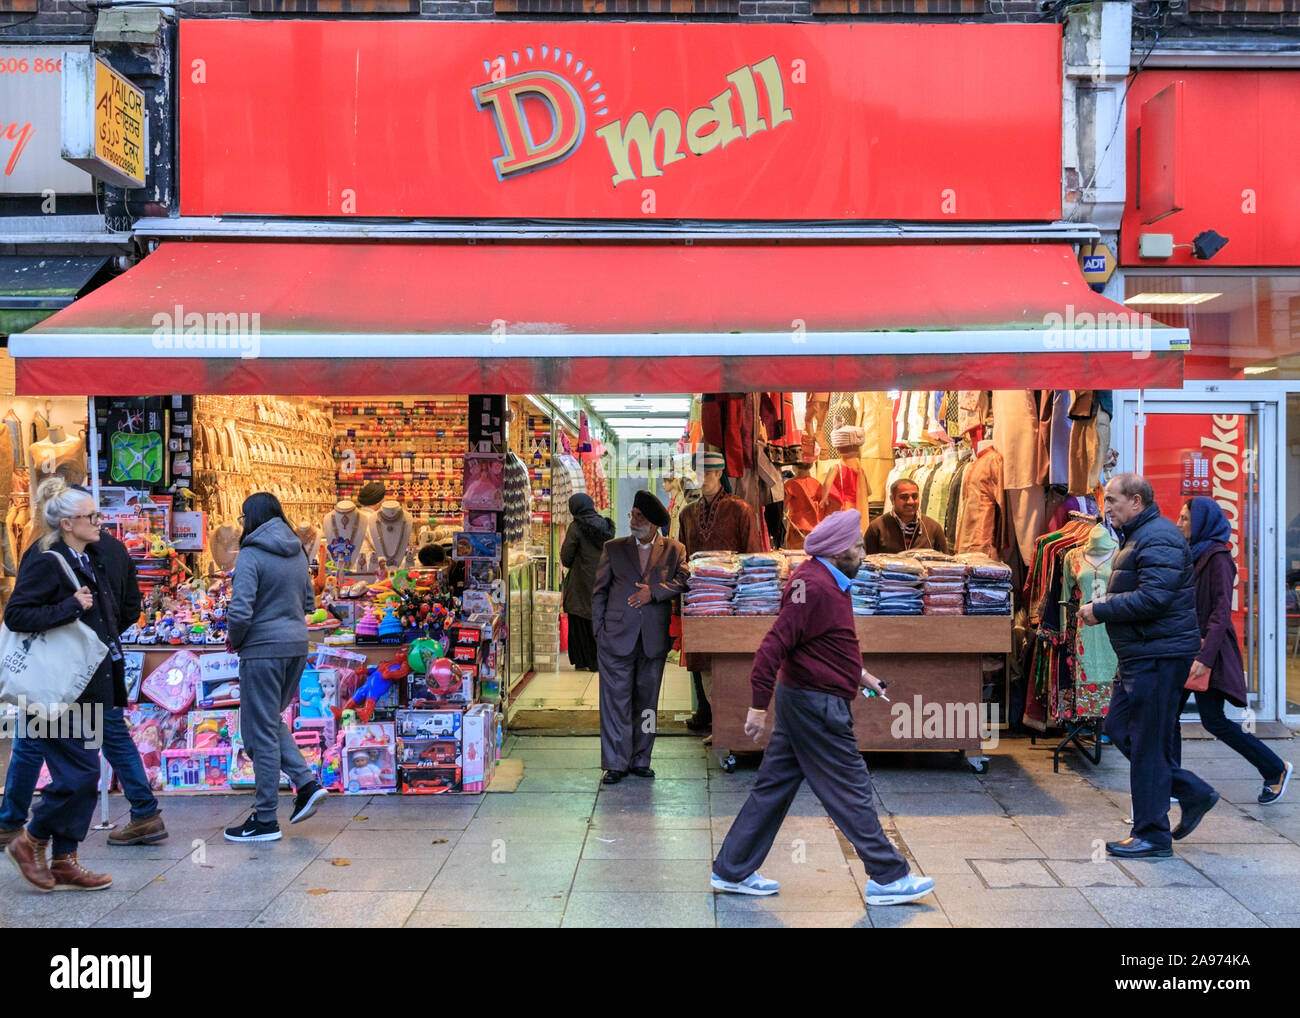 D Mall Asian clothing shops and fashion mall exterior view of people browsing and shopping, Southall High Street, London, UK Stock Photo